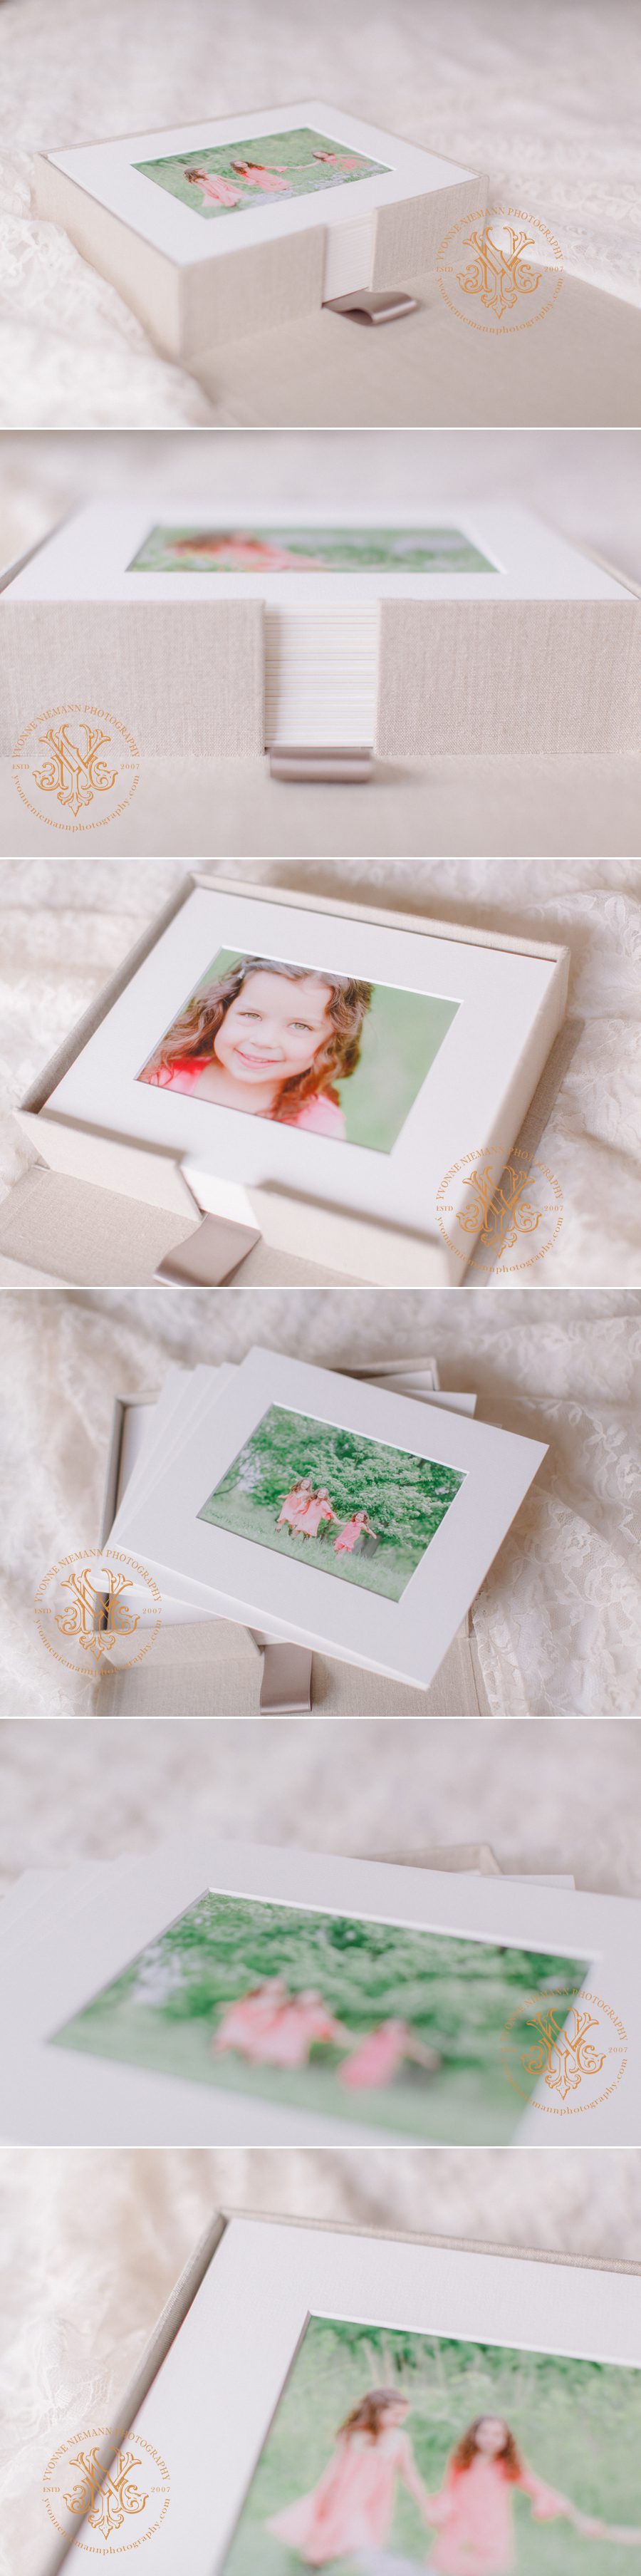 Fine Art Image box, offered by Athens children's photographer, contains matted prints.